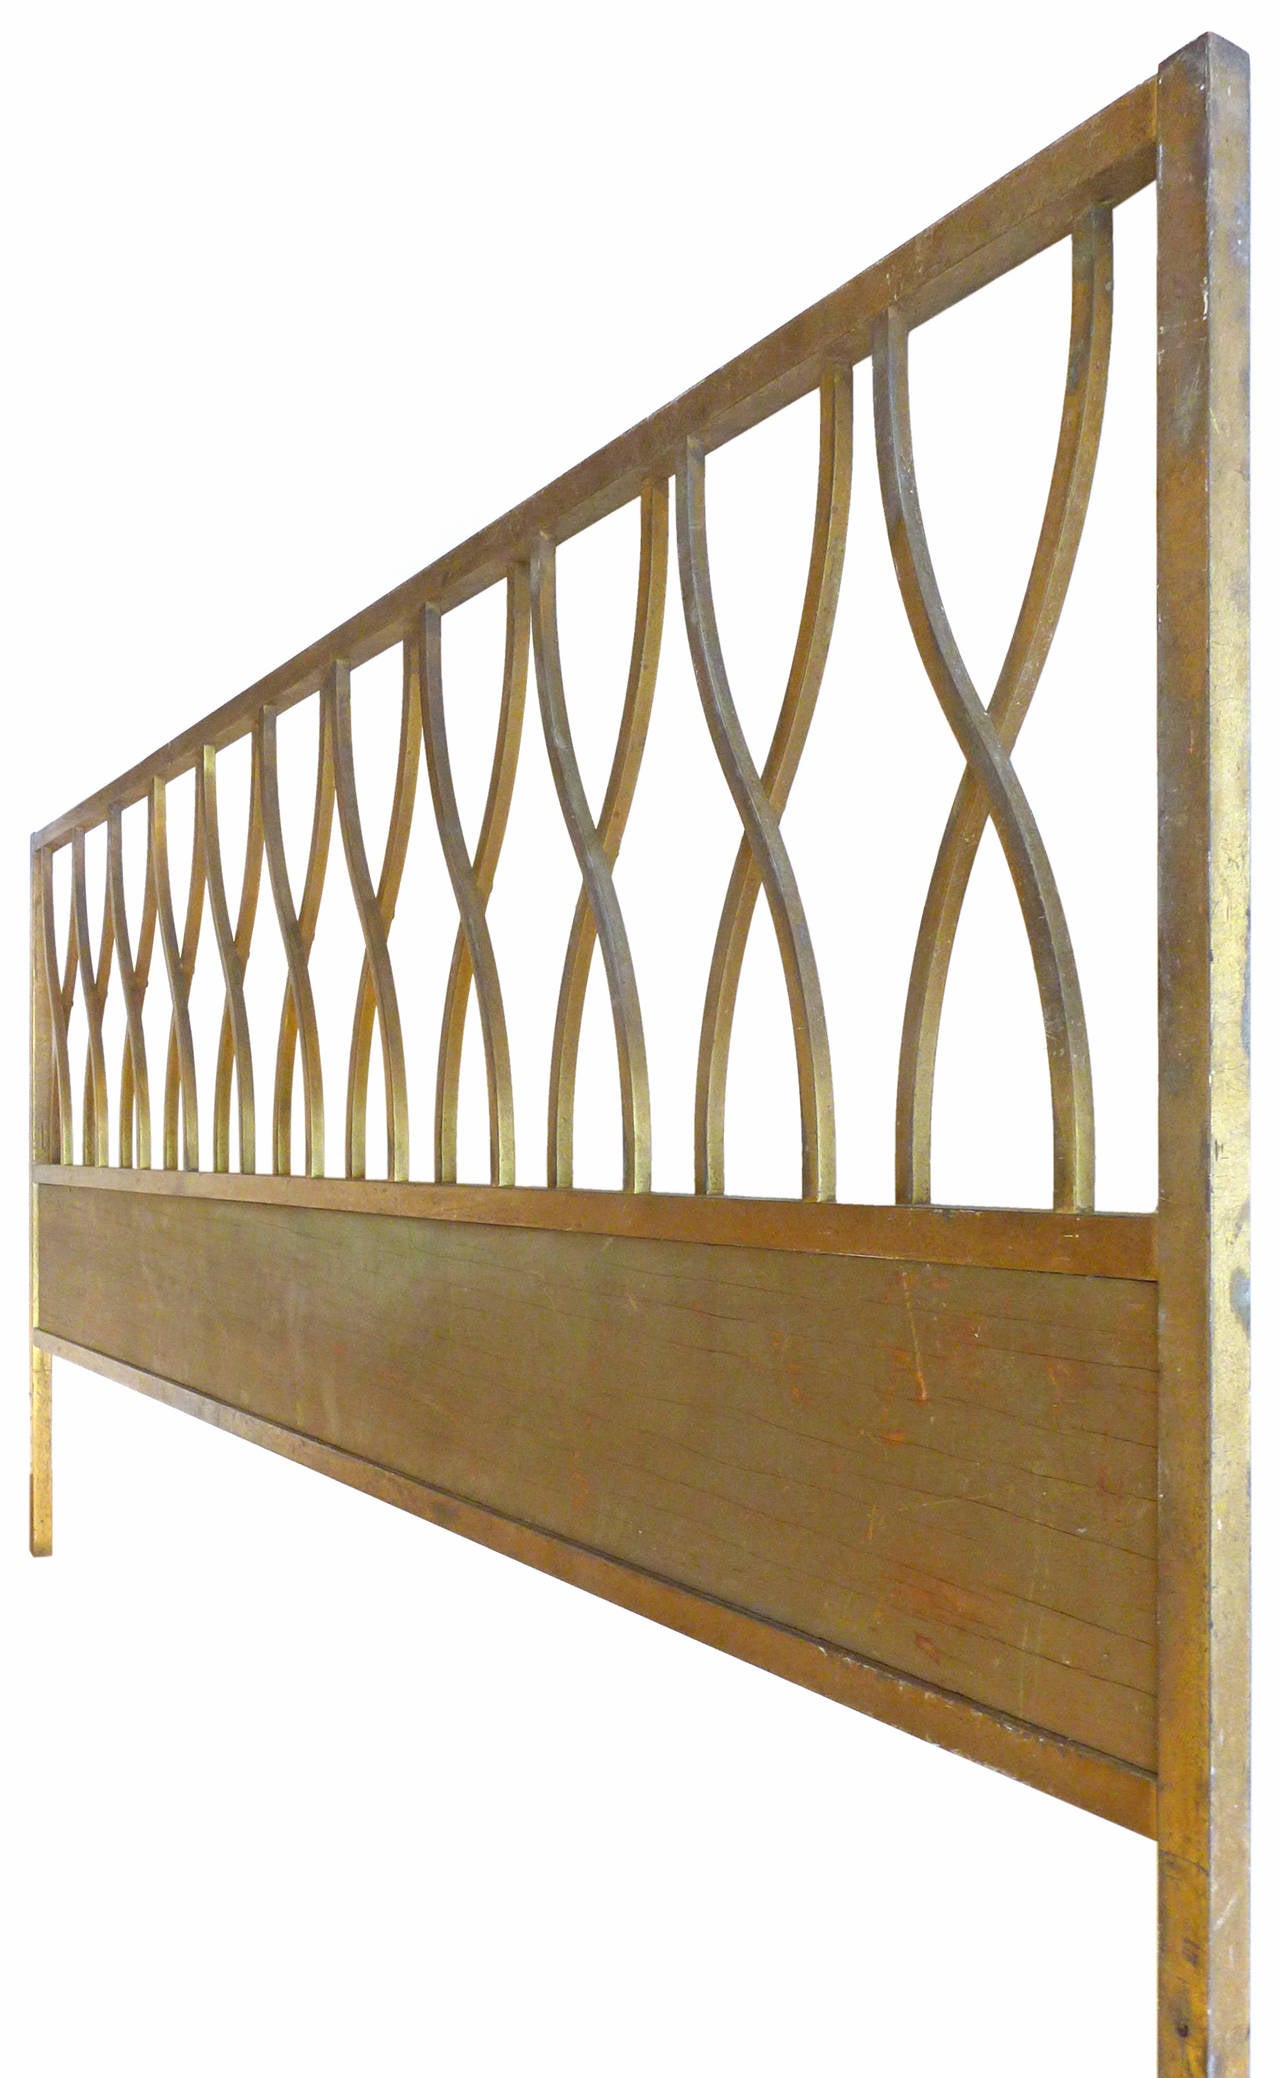 An elegant, king-size headboard of square brass tubing.  A wonderfully simple, repeating linear-pattern of undulating x's exhibiting nice decorative geometry and subtly graceful aesthetic.  A much desired, even patina throughout.  An exceptional